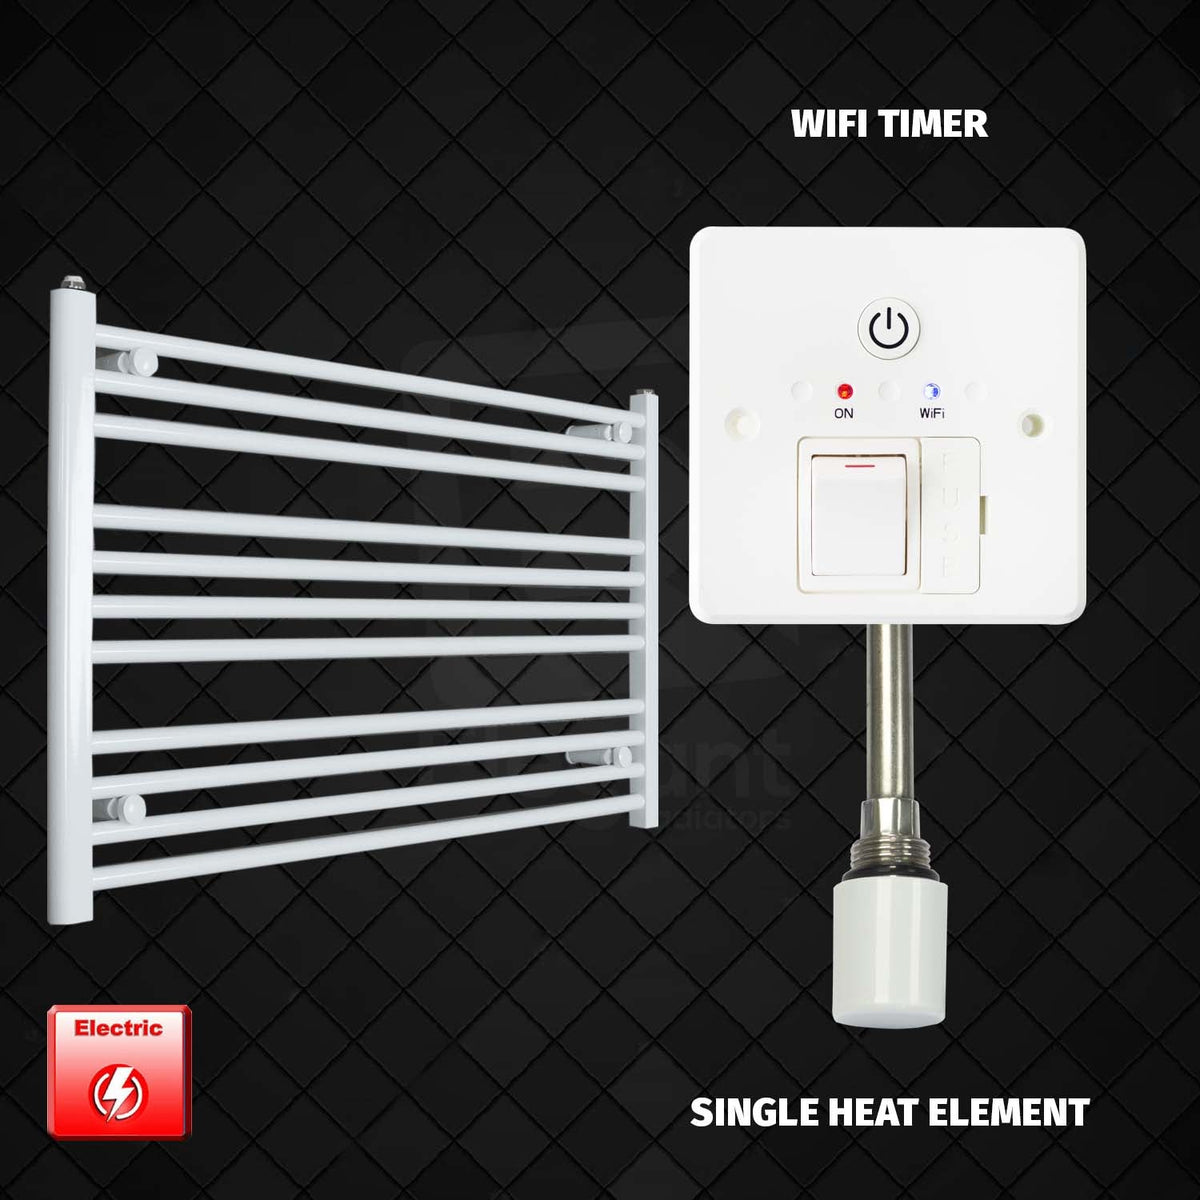 600 x 1200 Pre-Filled Electric Heated Towel Radiator White HTR Single heat element Wifi timer